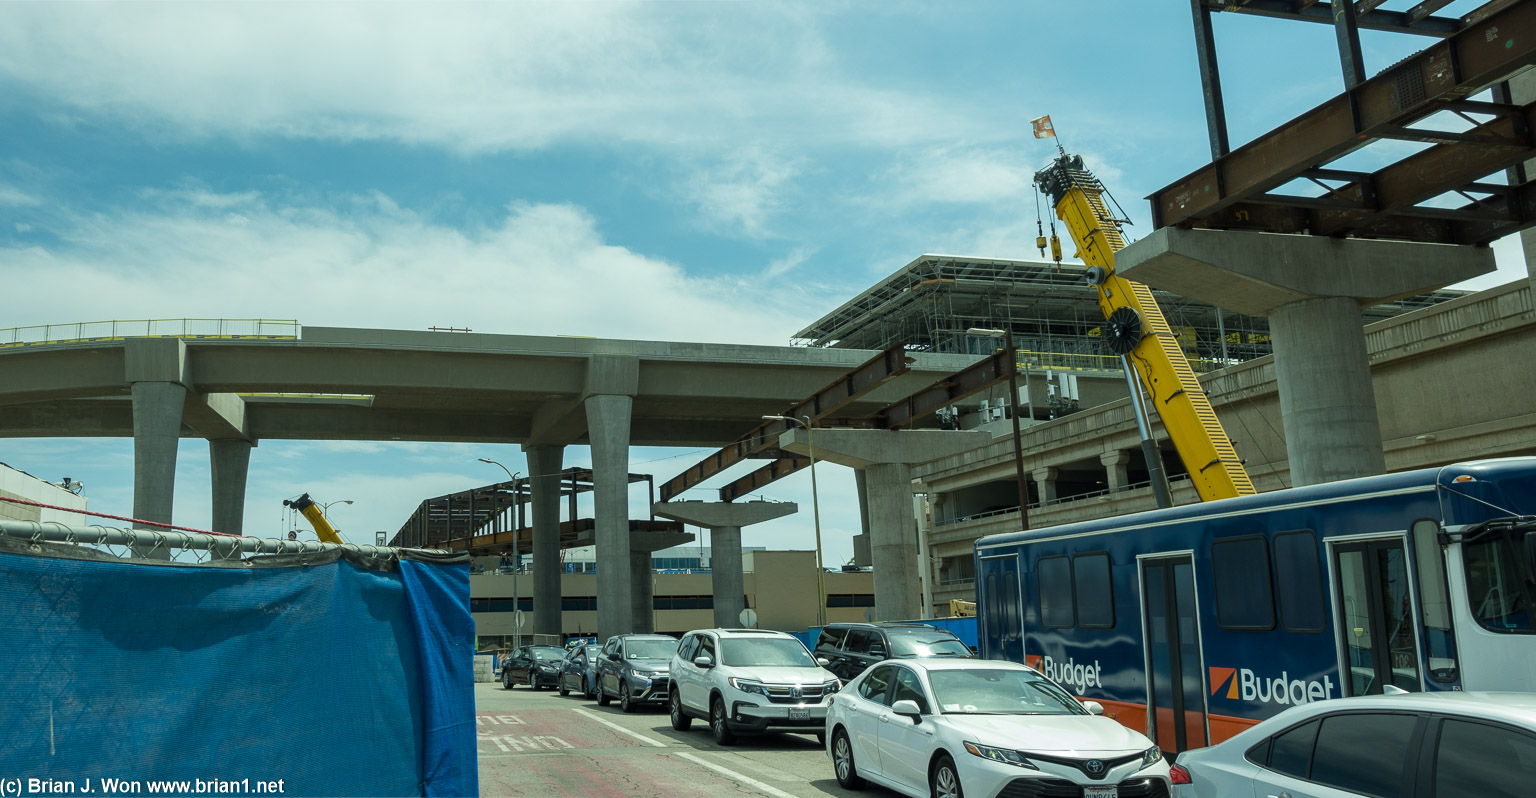 Automated people mover (APM) under construction at LAX.